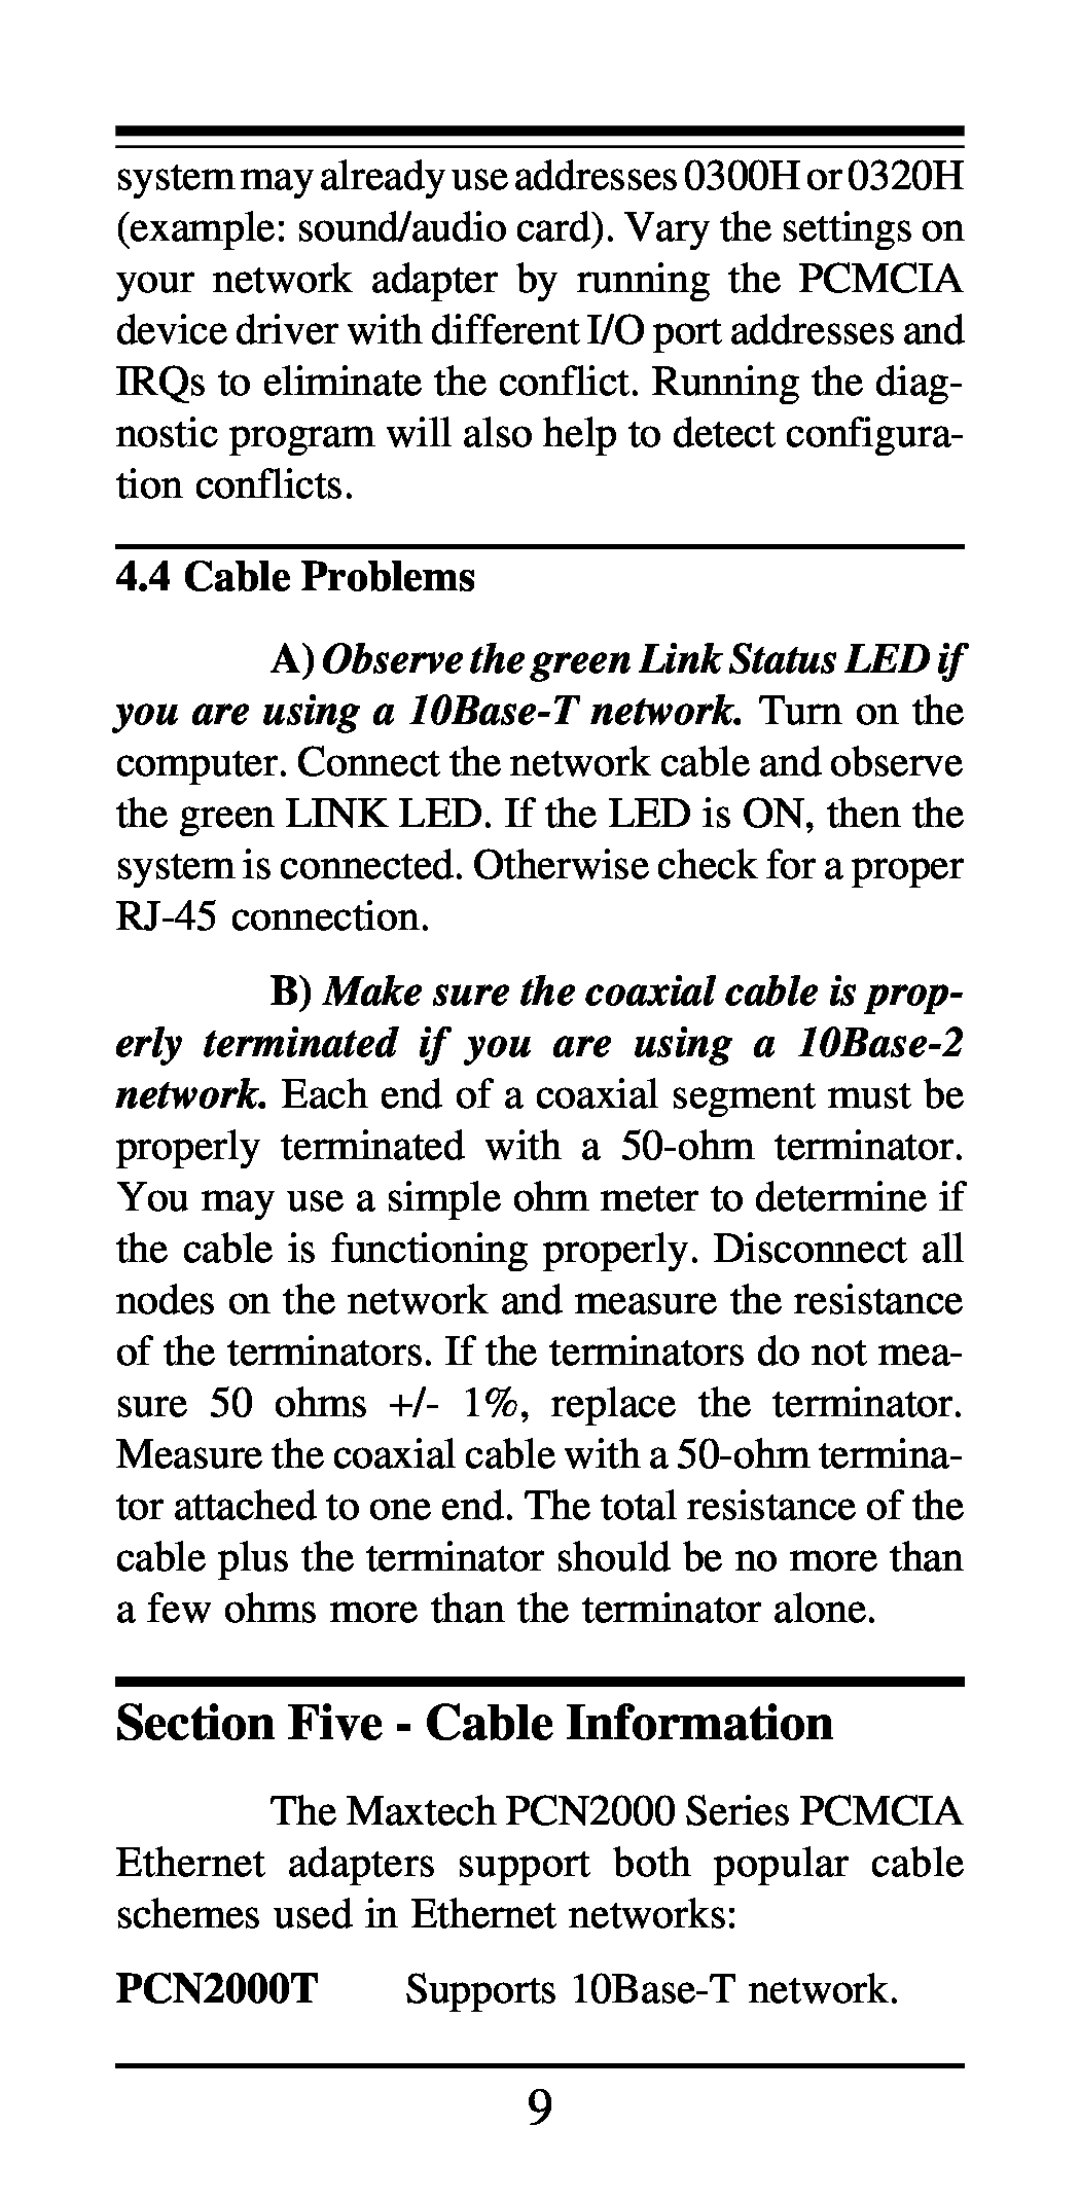 MaxTech PCN2000 Series manual Section Five - Cable Information, Cable Problems 